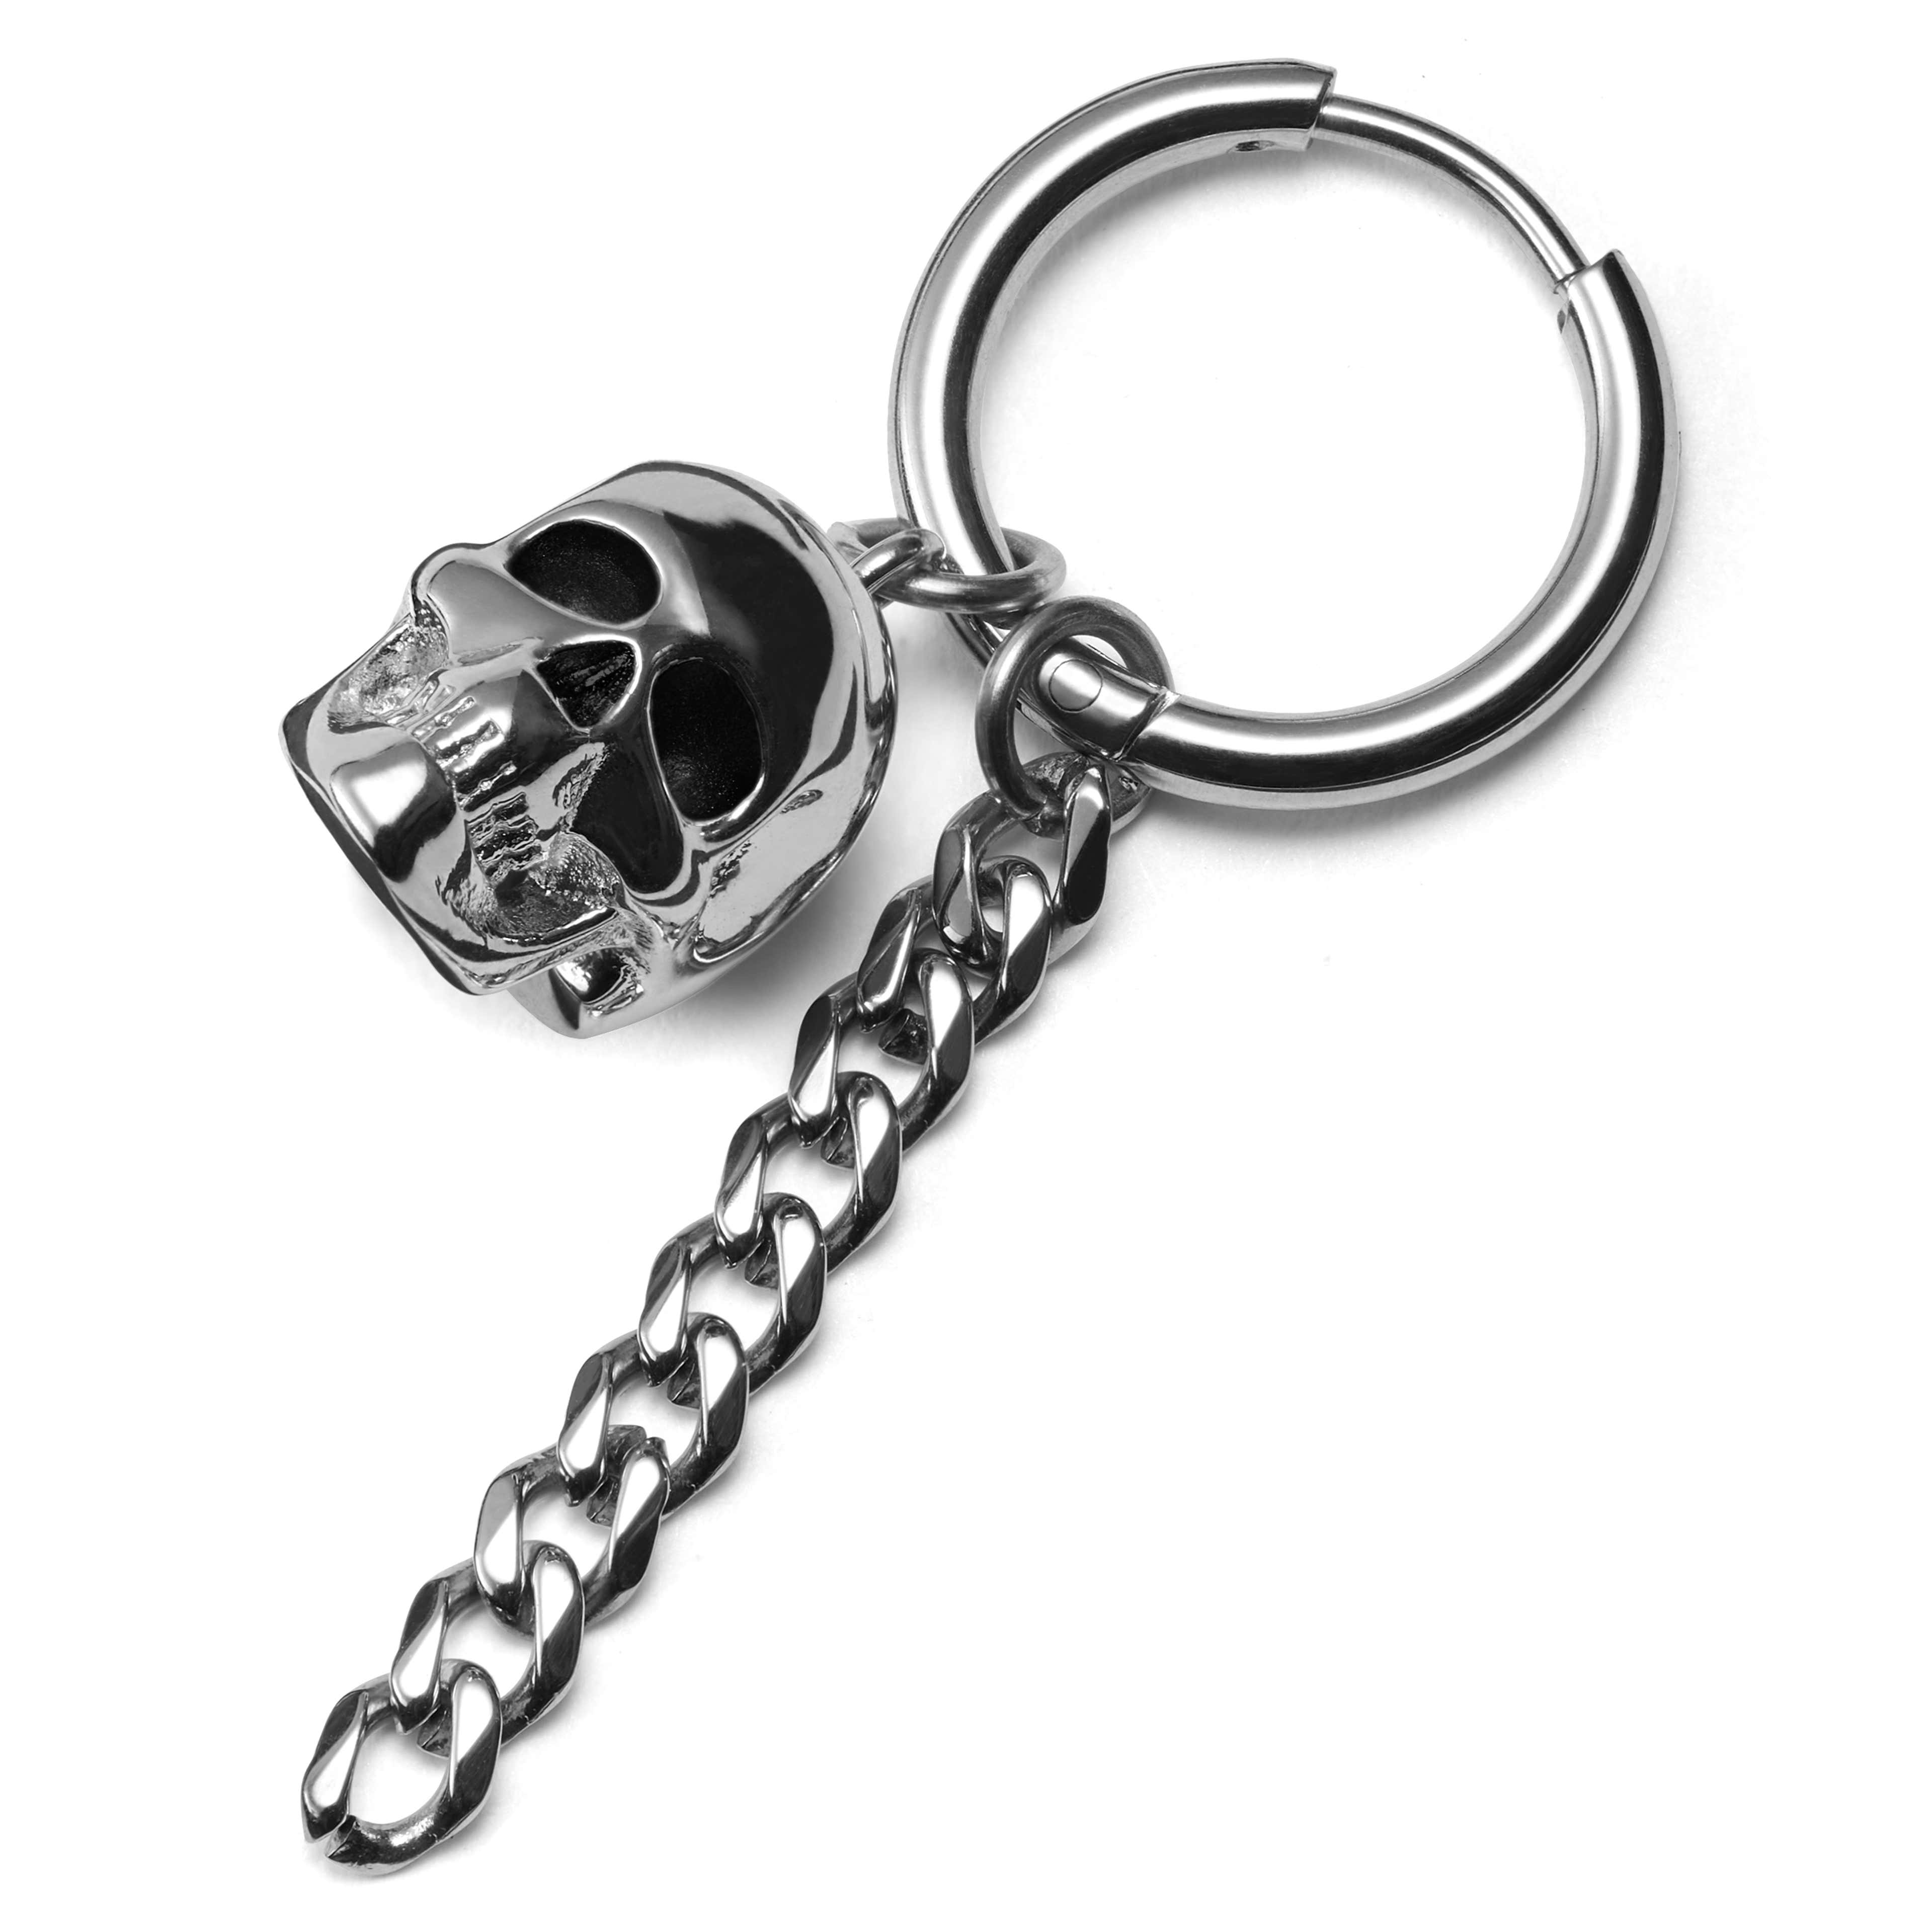 Silver-Tone Steel Drop Hoop Earring with Skull & Chain Charms